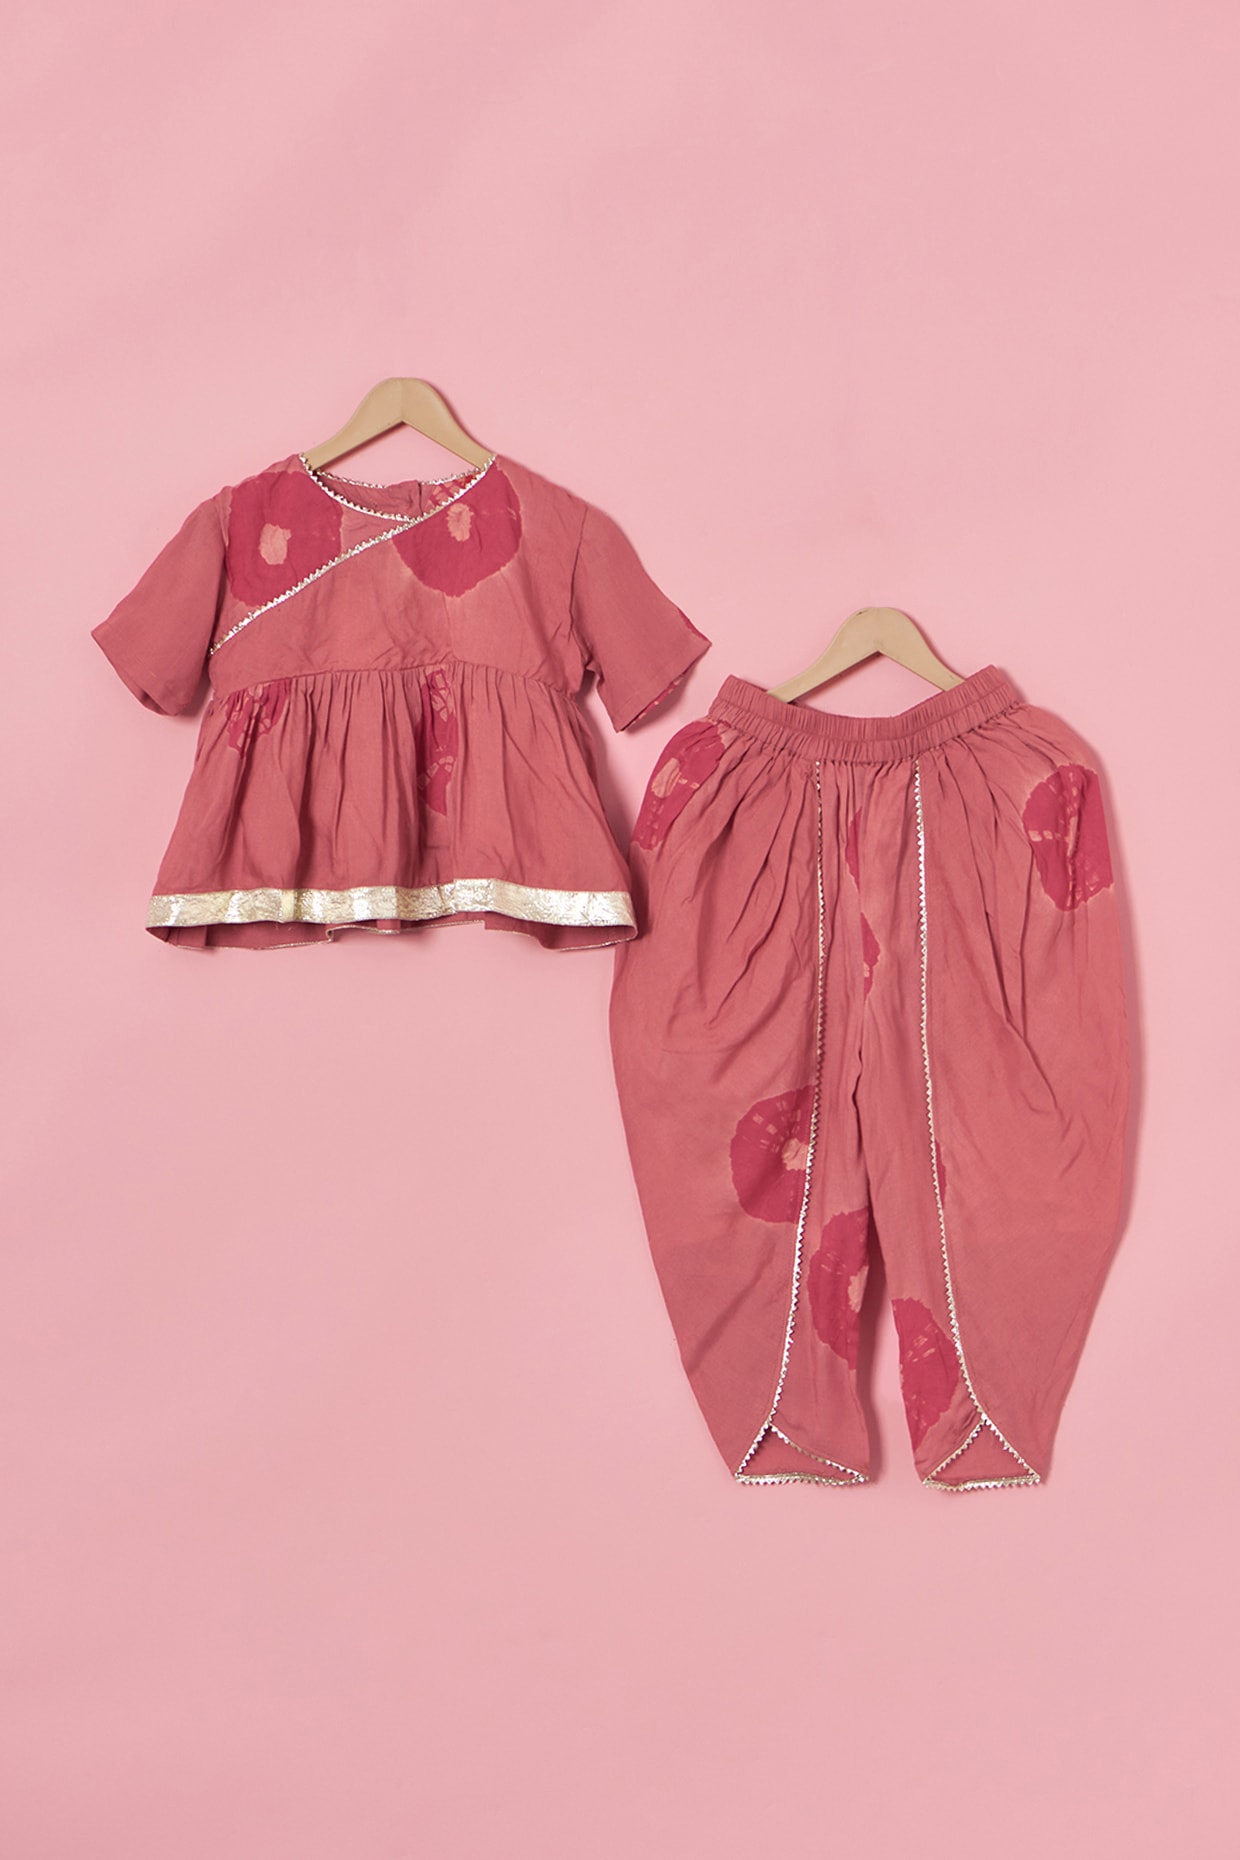 Buy Pink Color Full Sets Ethnic Wear Girls Top With Dhoti Set-Pink Clothing  for Girl Jollee